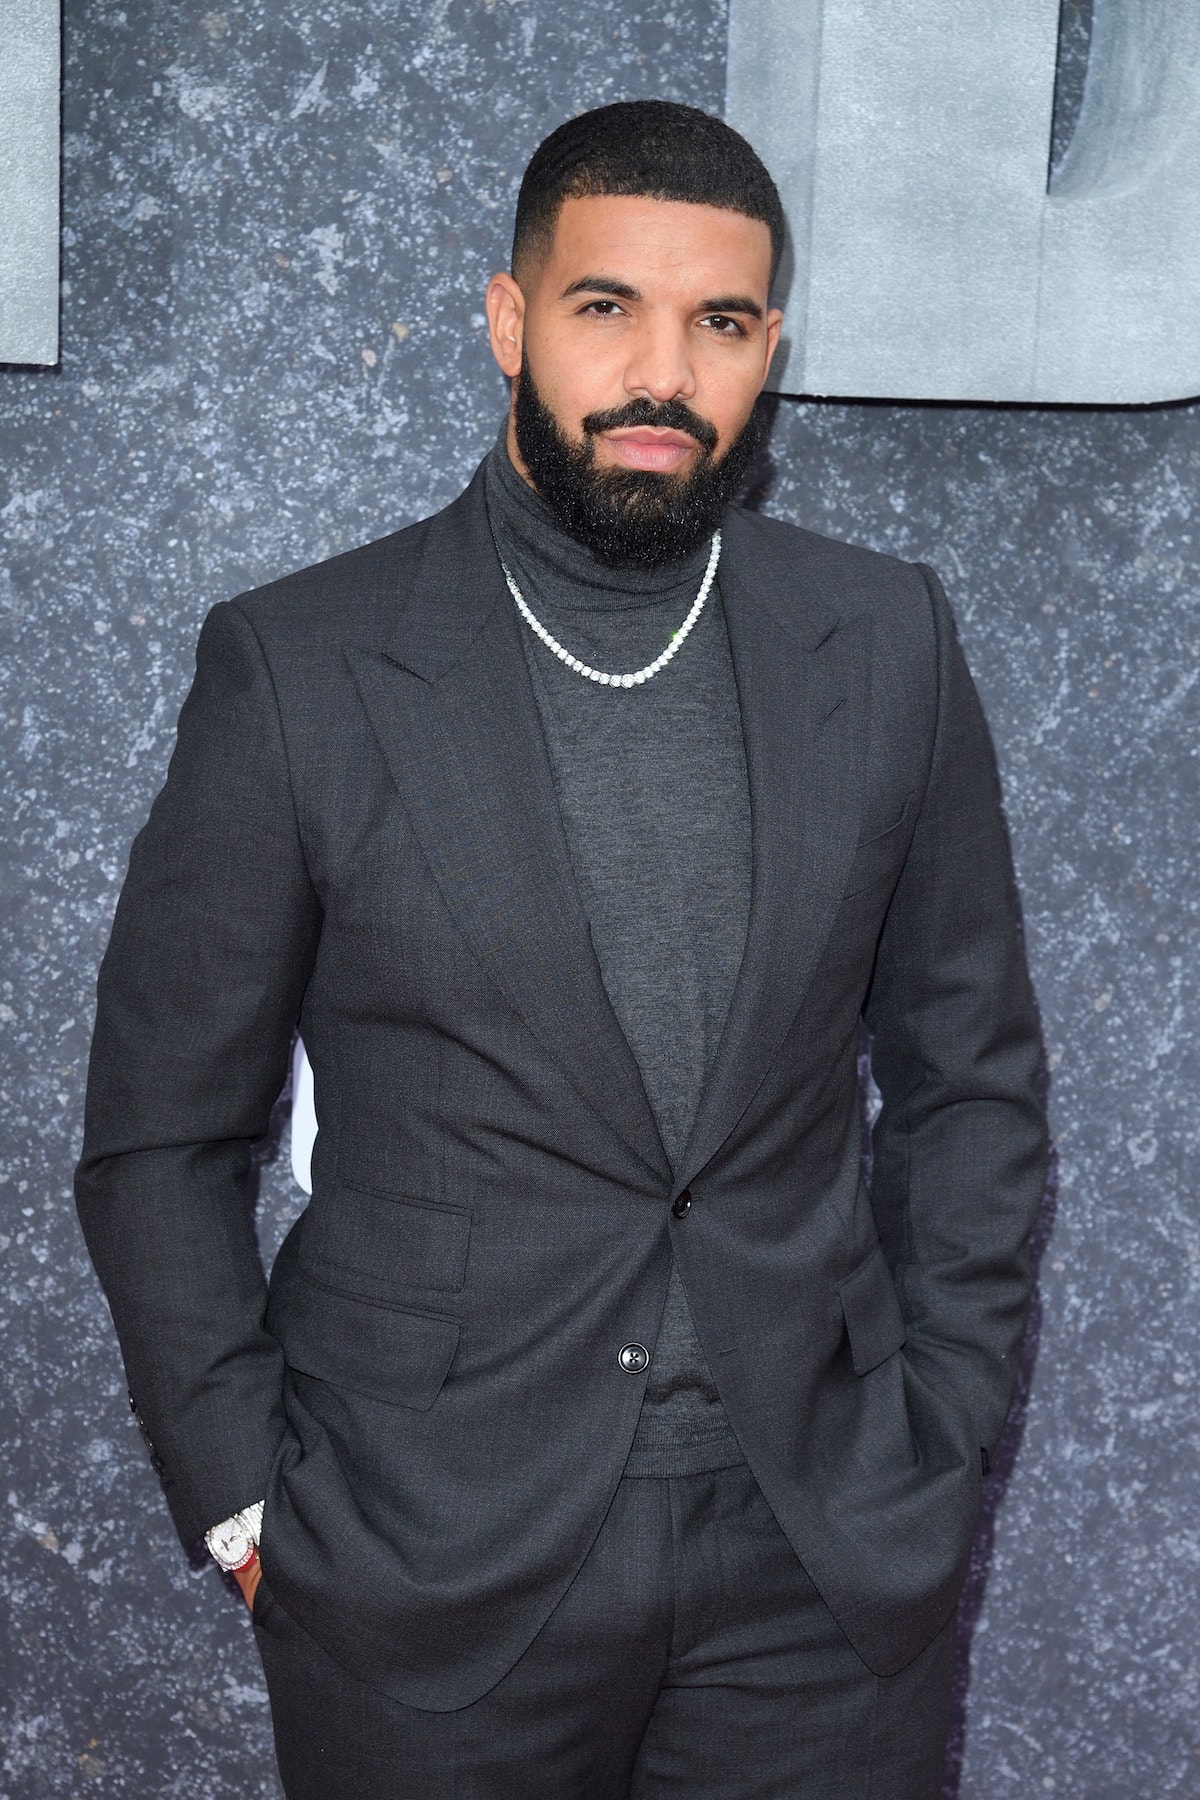 Drake Shares First Photo of Son Adonis Instagram Post Reveal